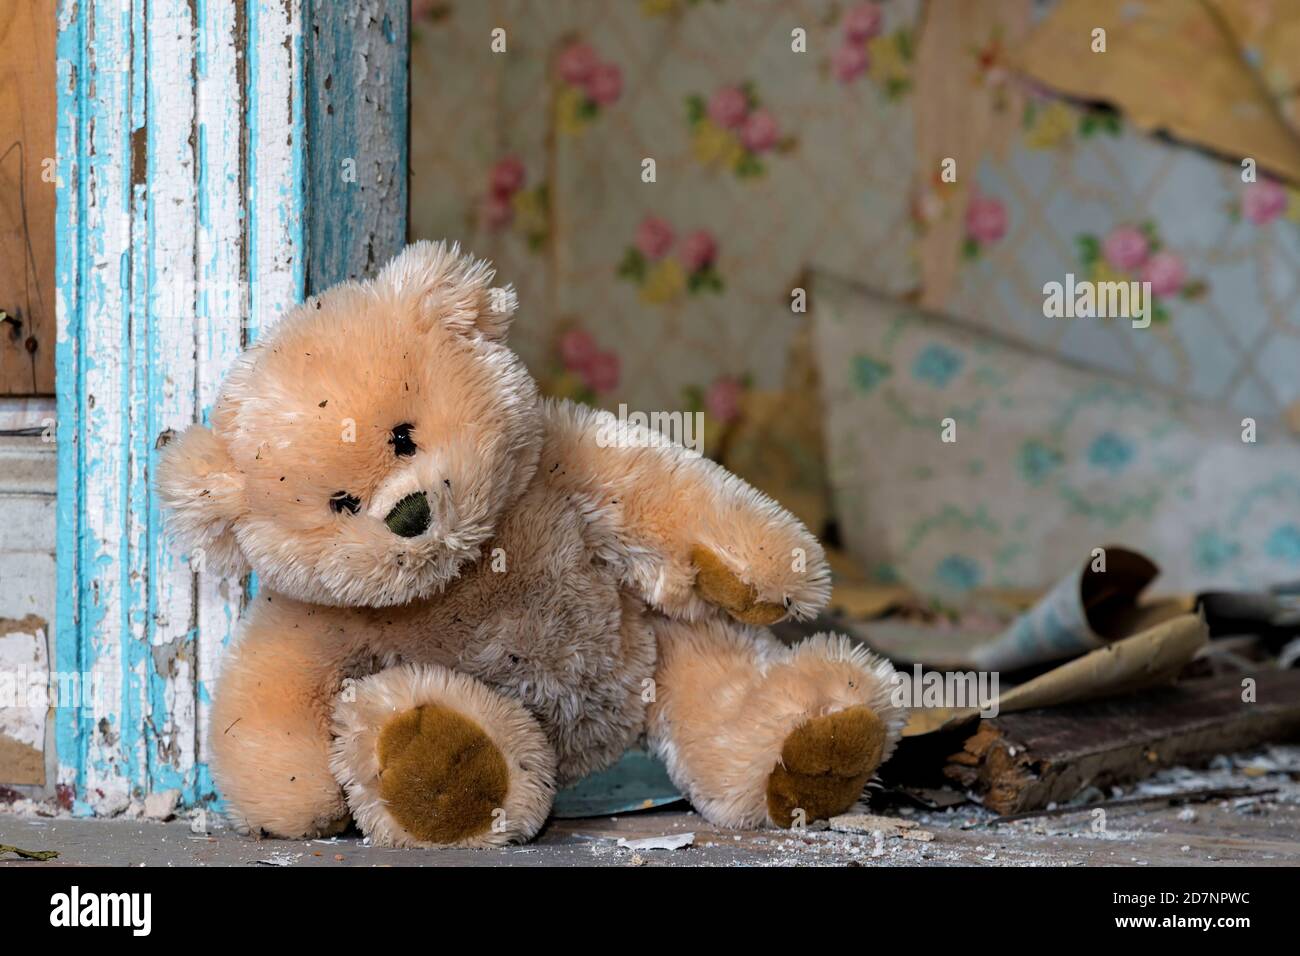 A dirty teddy bear leaning against a door frame in an old, abandoned house. Debris and assorted wallpaper peeling from the wall in the background. Stock Photo